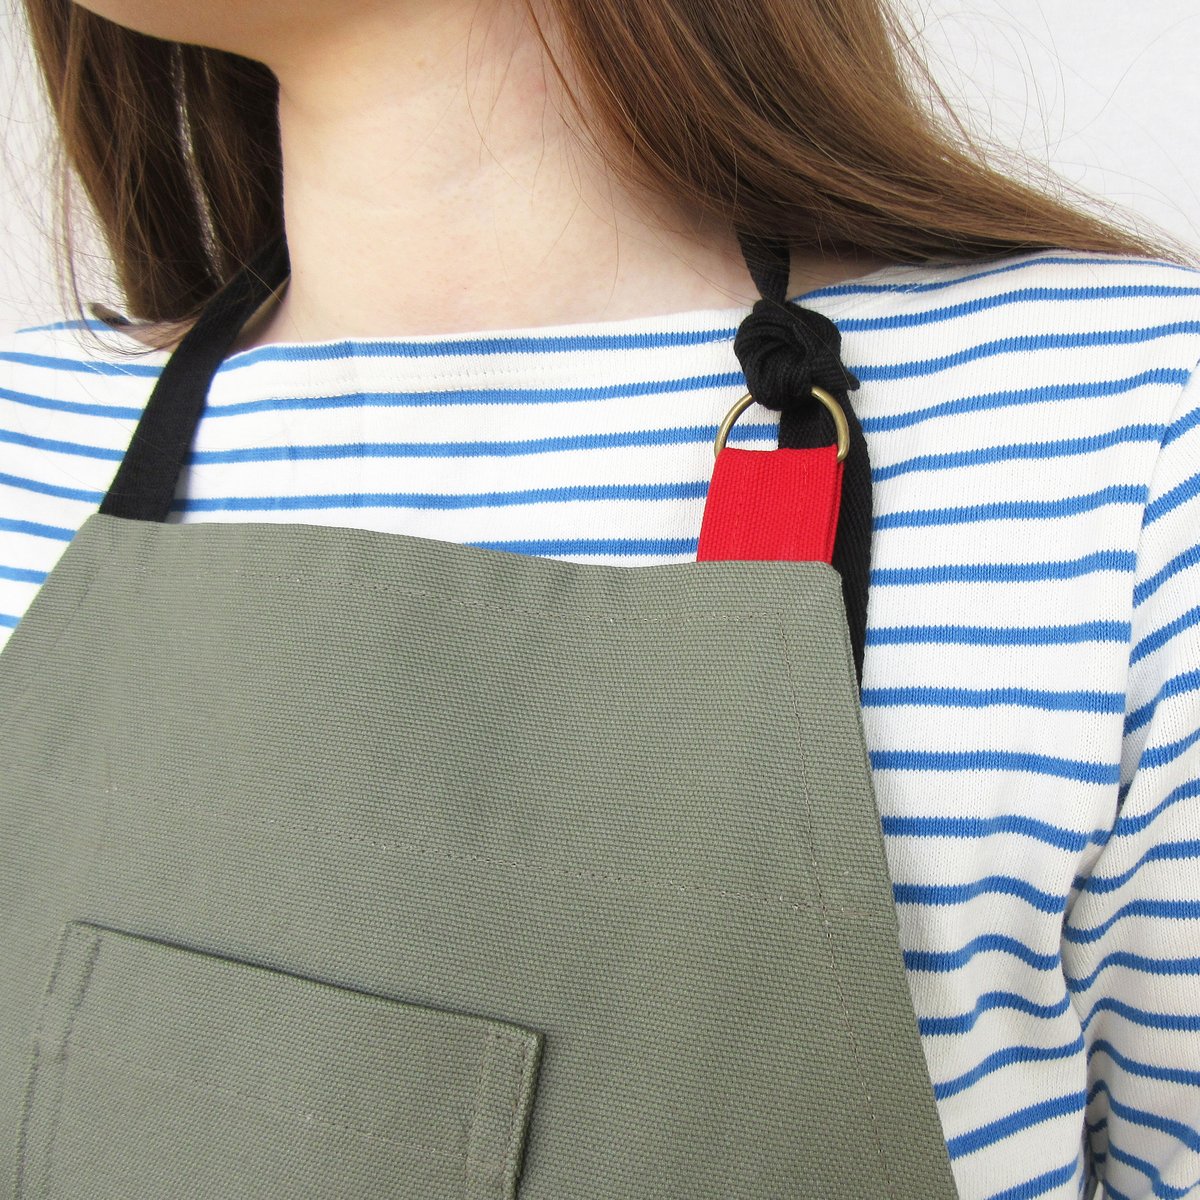 NEW! Split Leg Tie Apron for Potters & Makers with 3 Pockets. Dusty Green.  No14:3